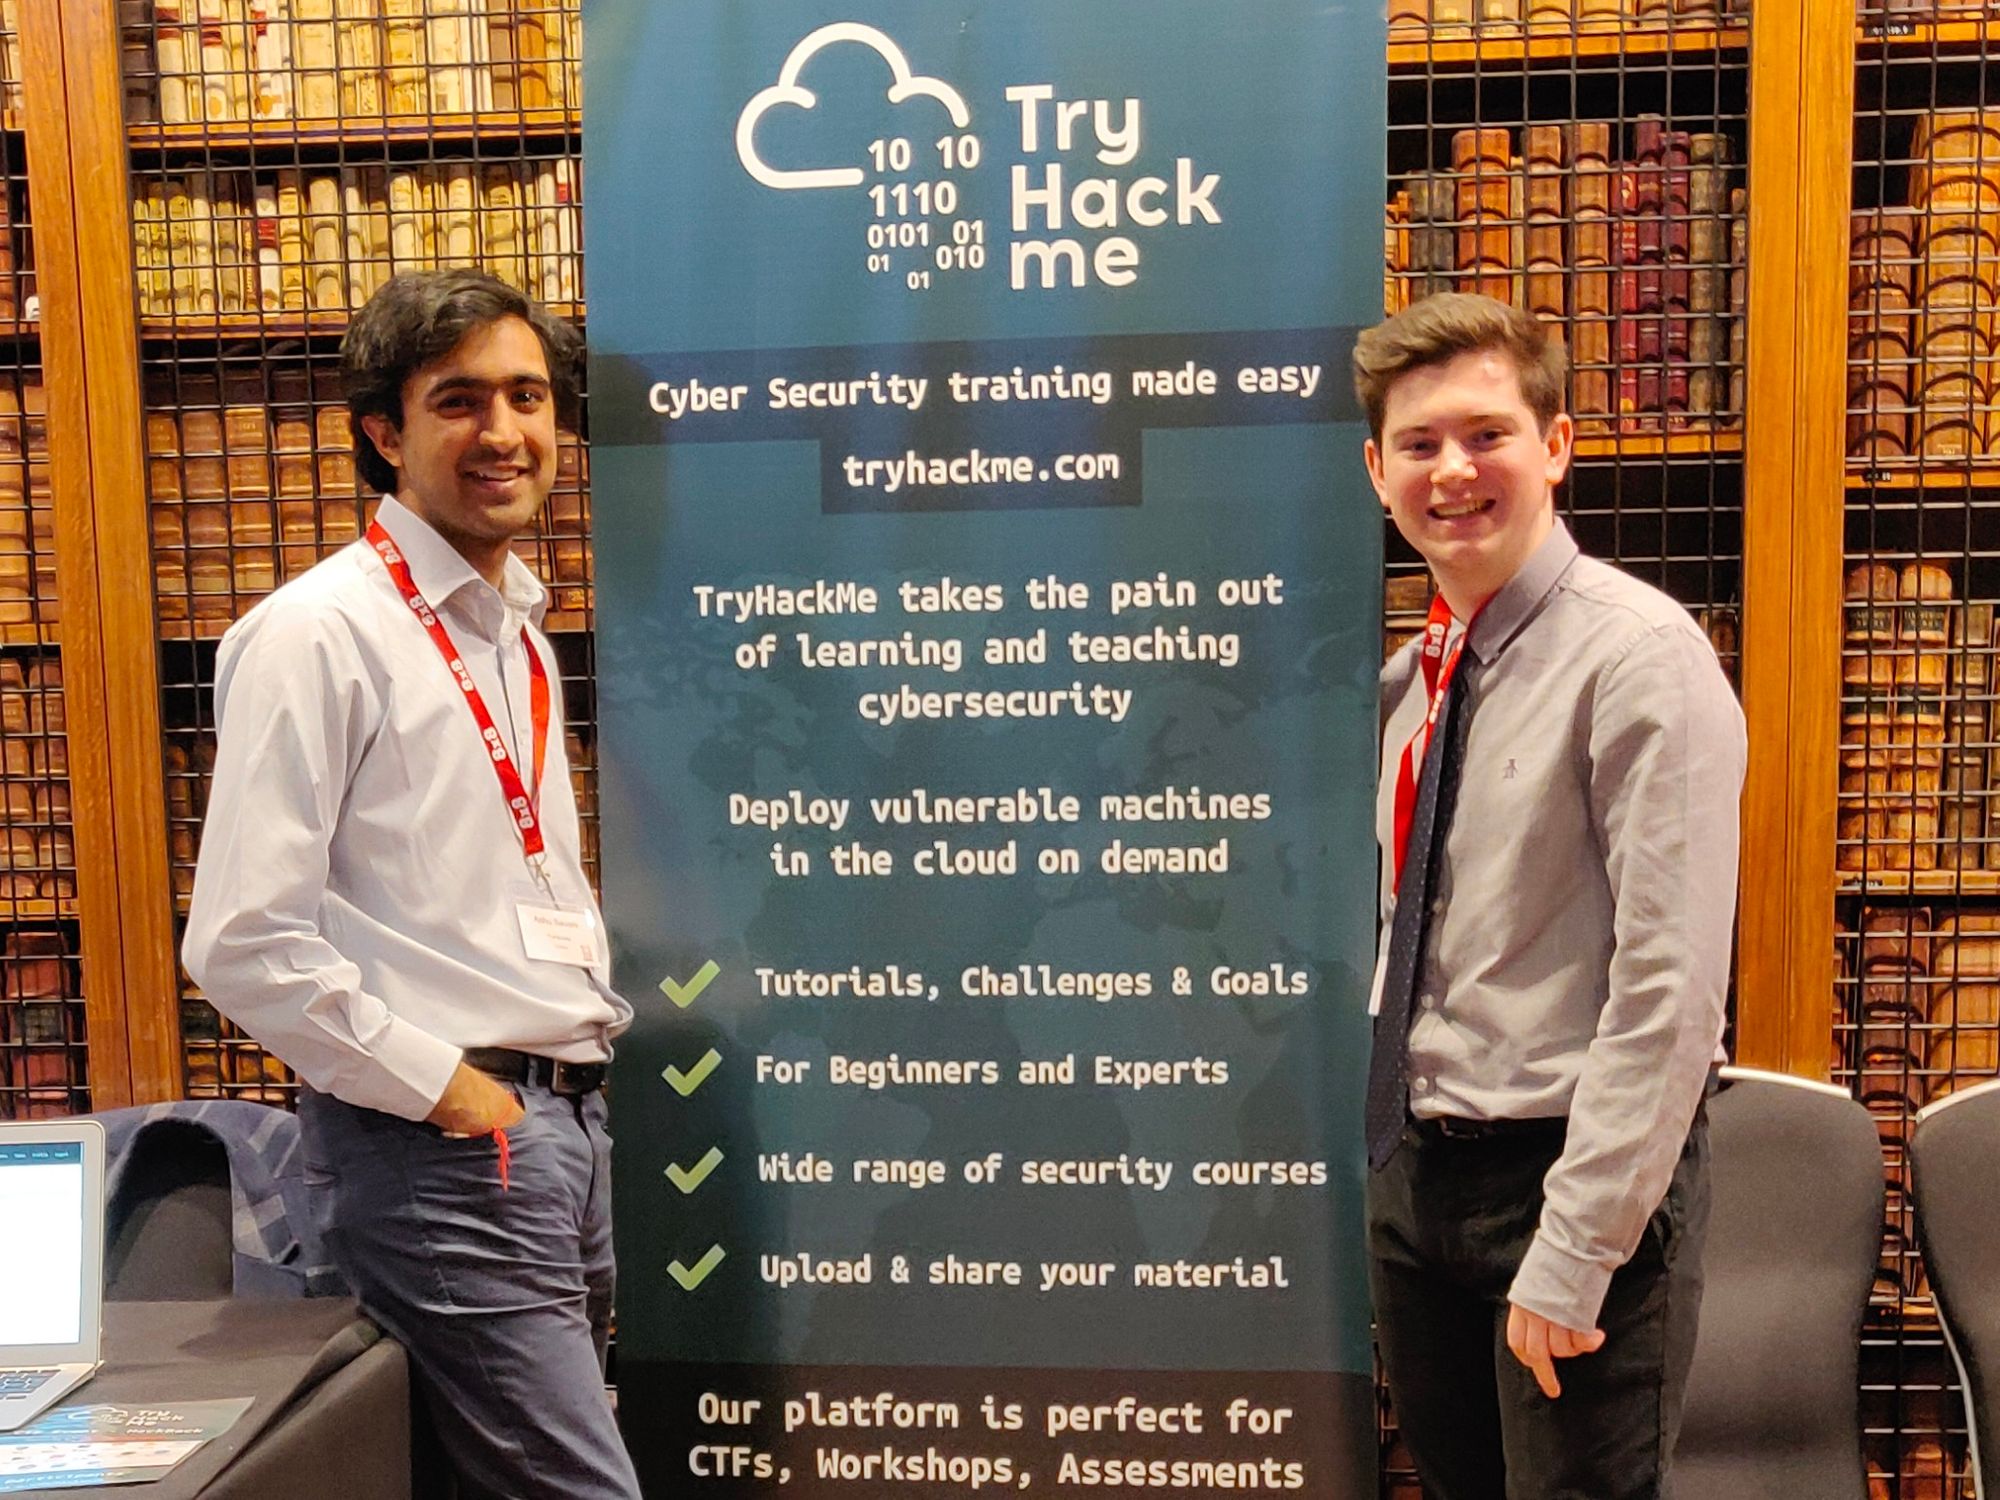 Ashu and Ben - TryHackMe co-founders with a TryHackMe sign